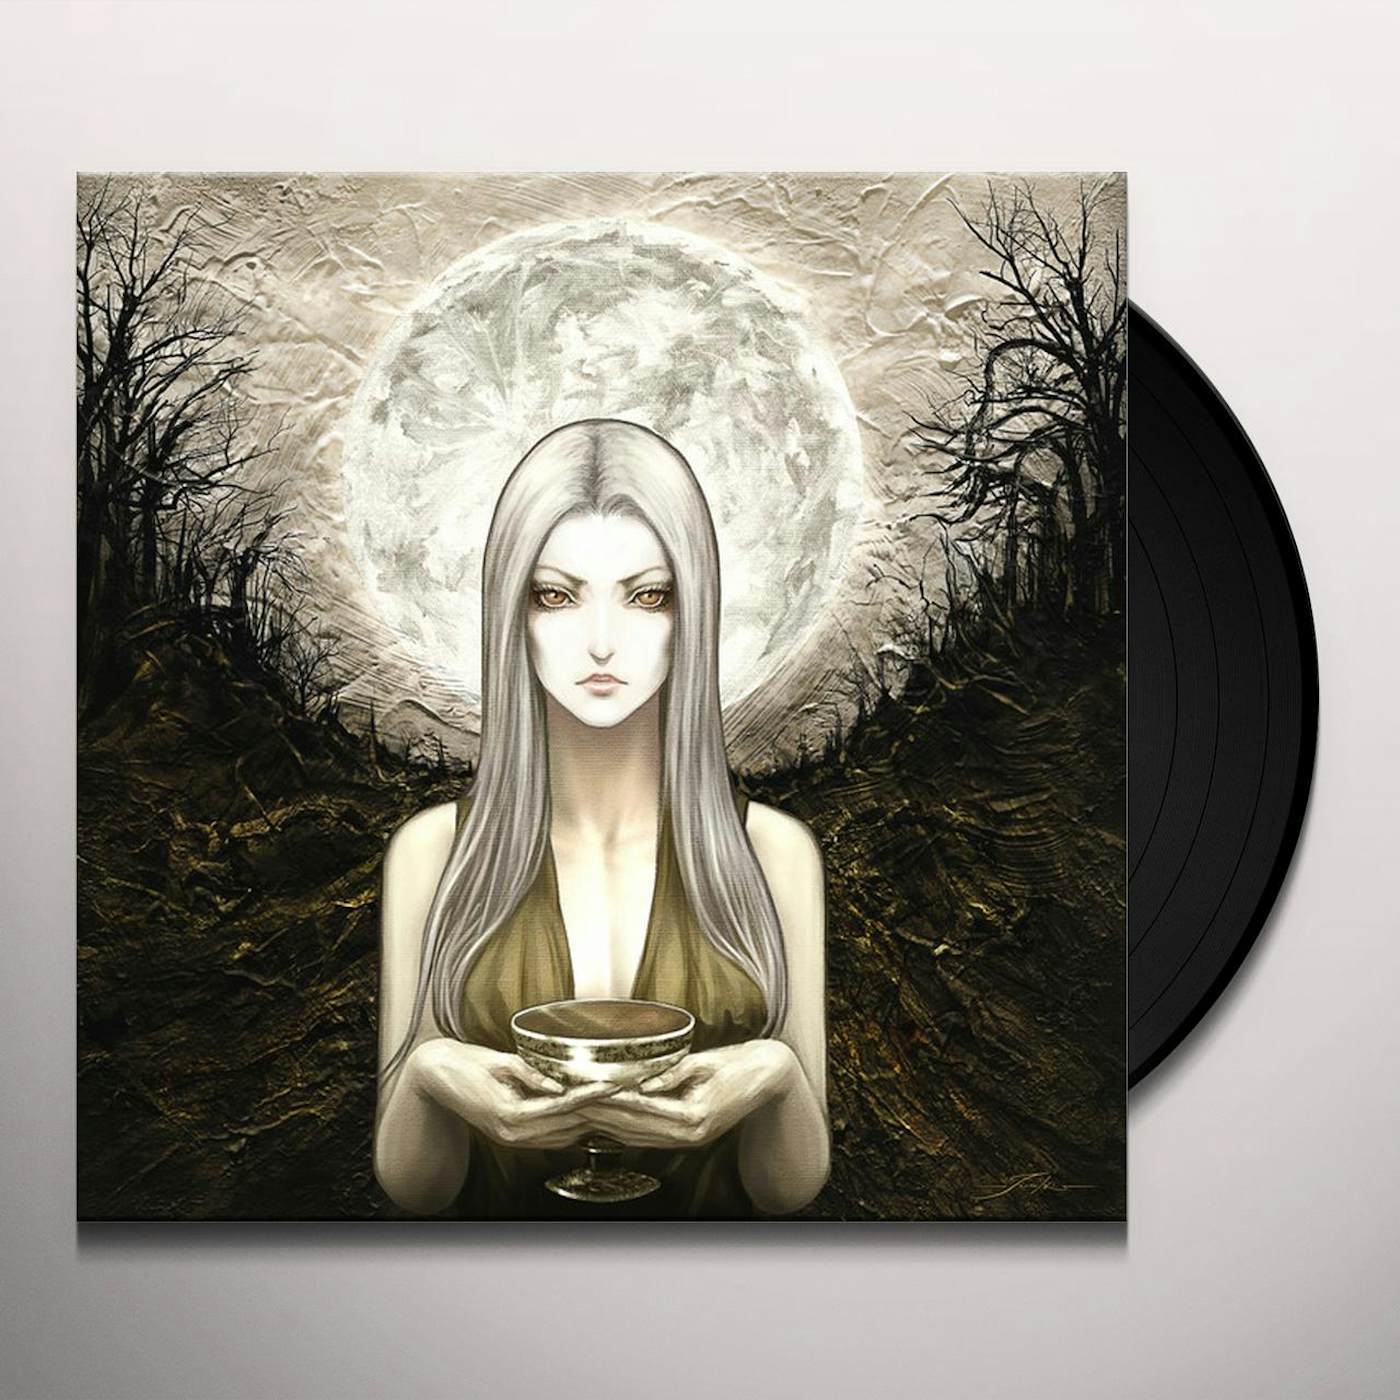 All Hell WITCH'S GRAIL Vinyl Record